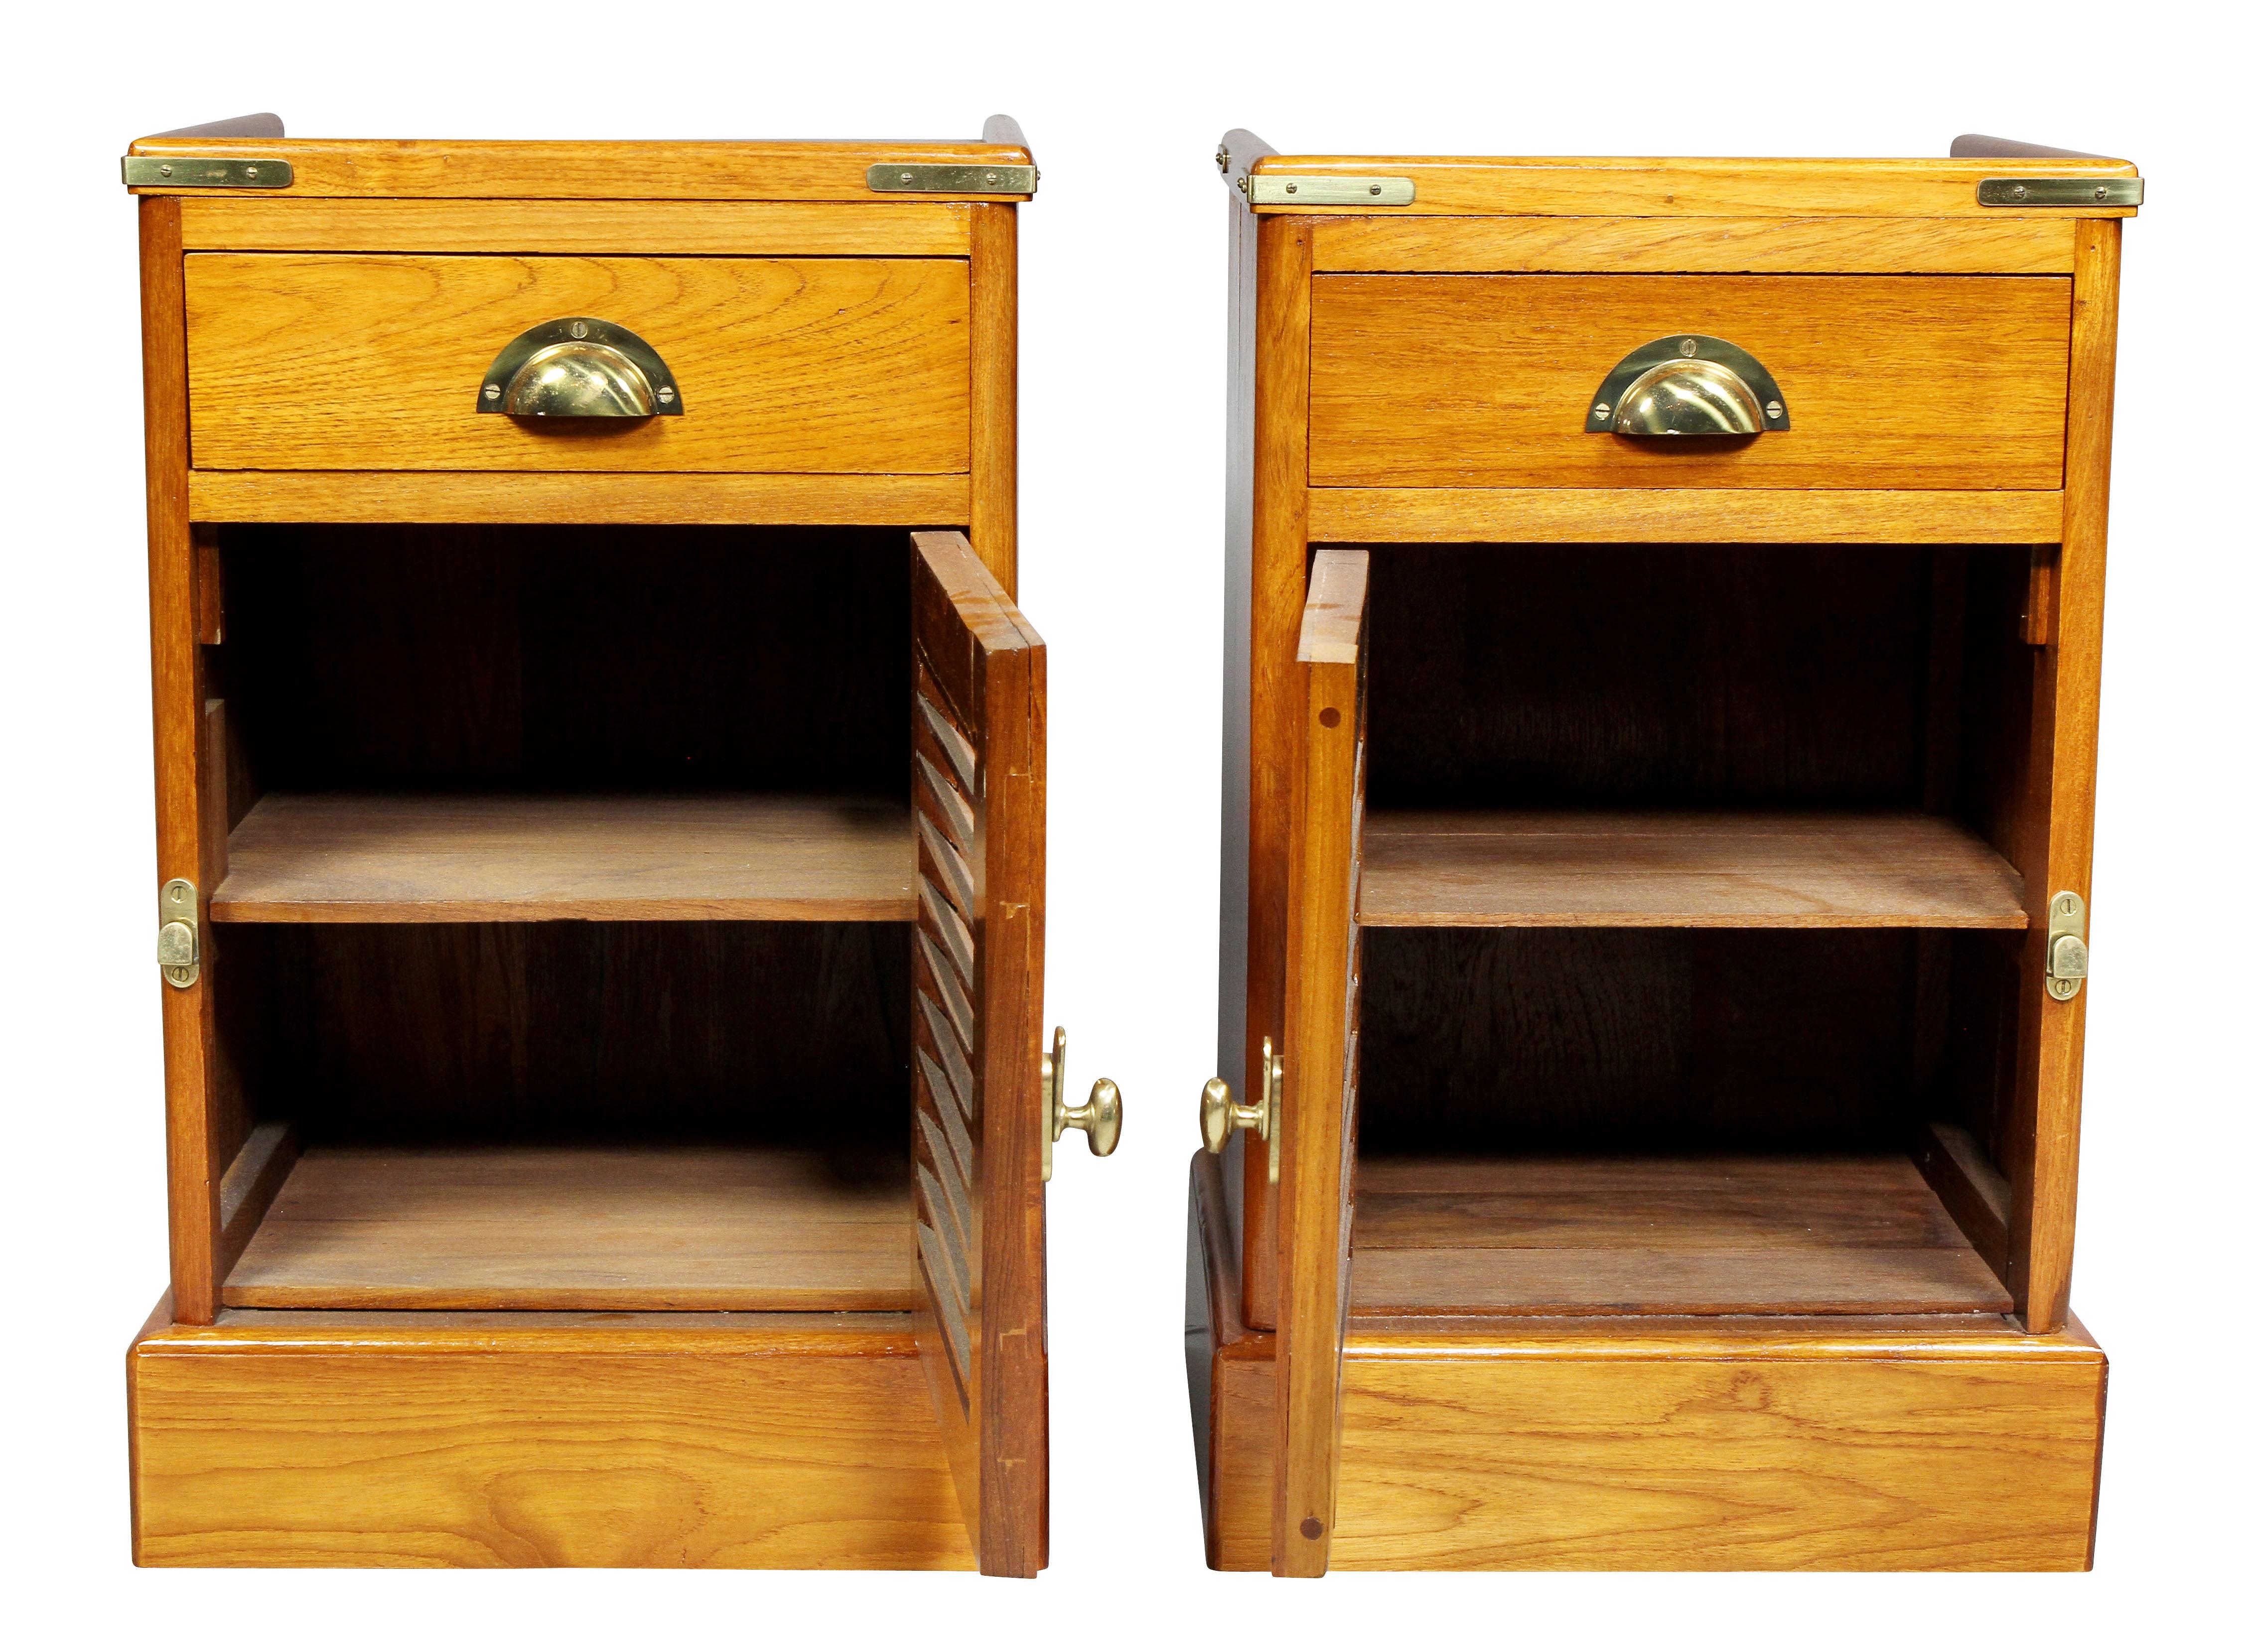 North American Pair of Teakwood Ship Bedside Cabinets